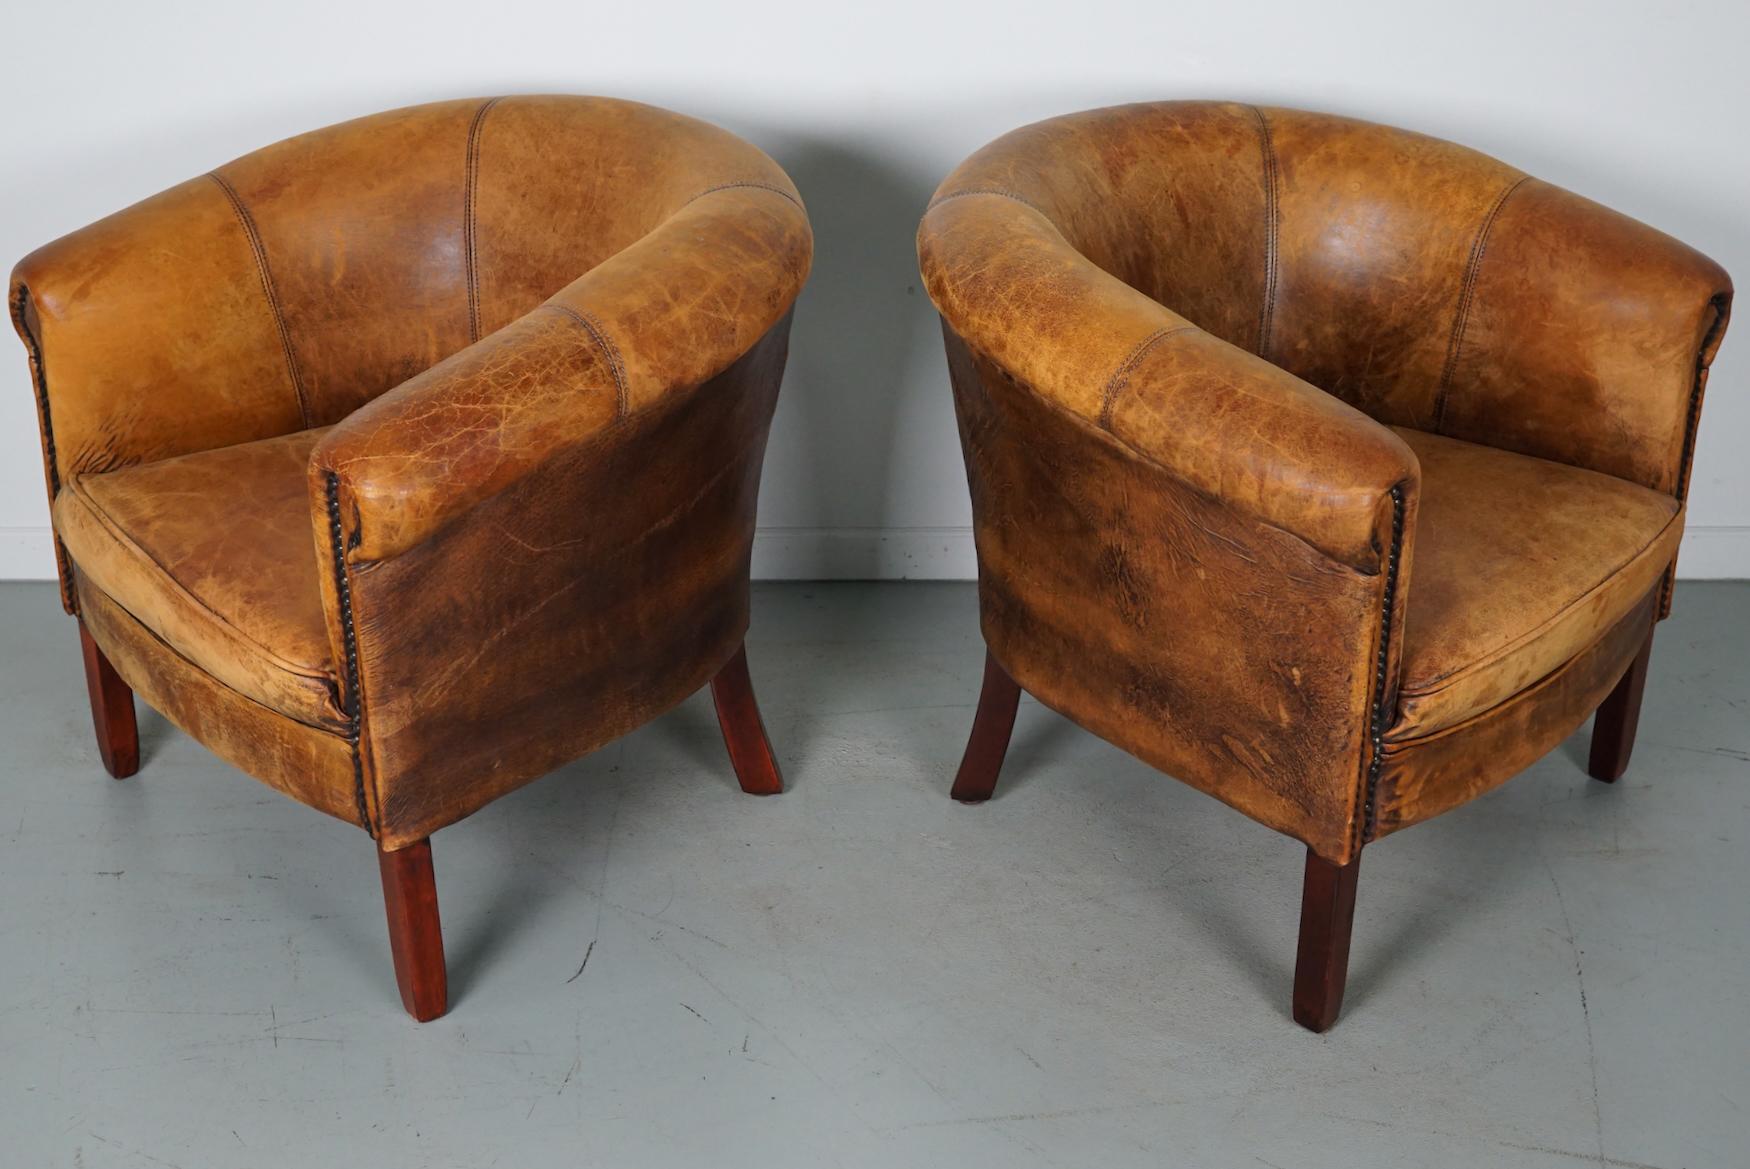 Vintage Dutch Cognac Colored Leather Club Chair, Set of 2 with Footstools For Sale 5